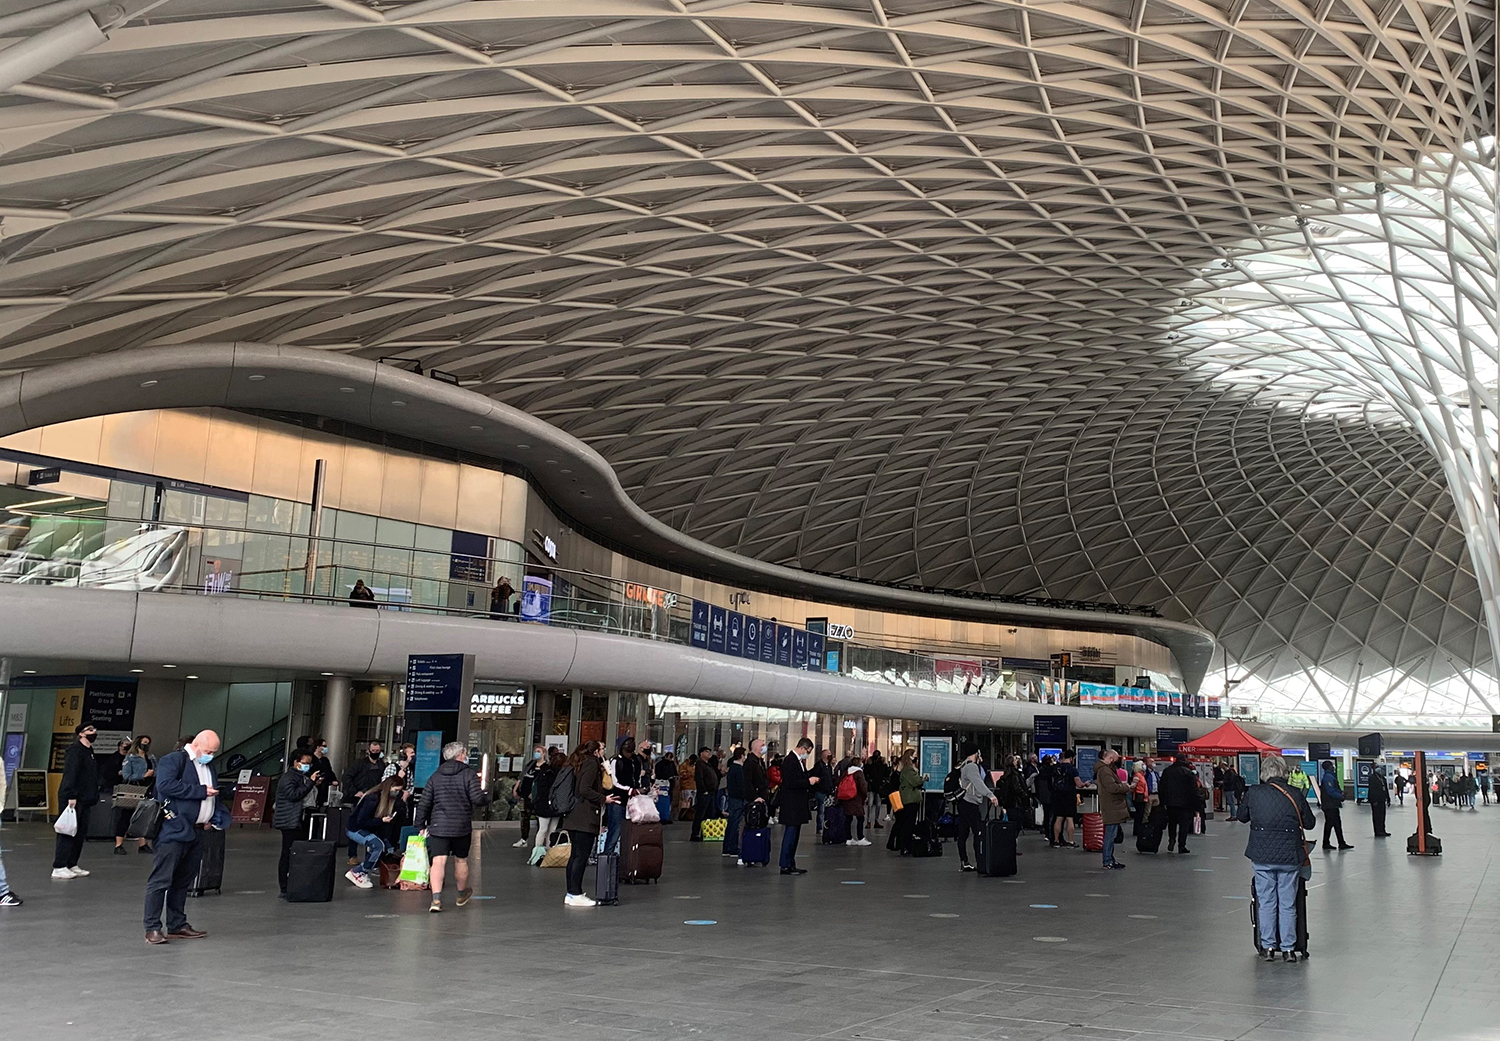 Passengers reminded of threeday closure at King’s Cross station 23rd